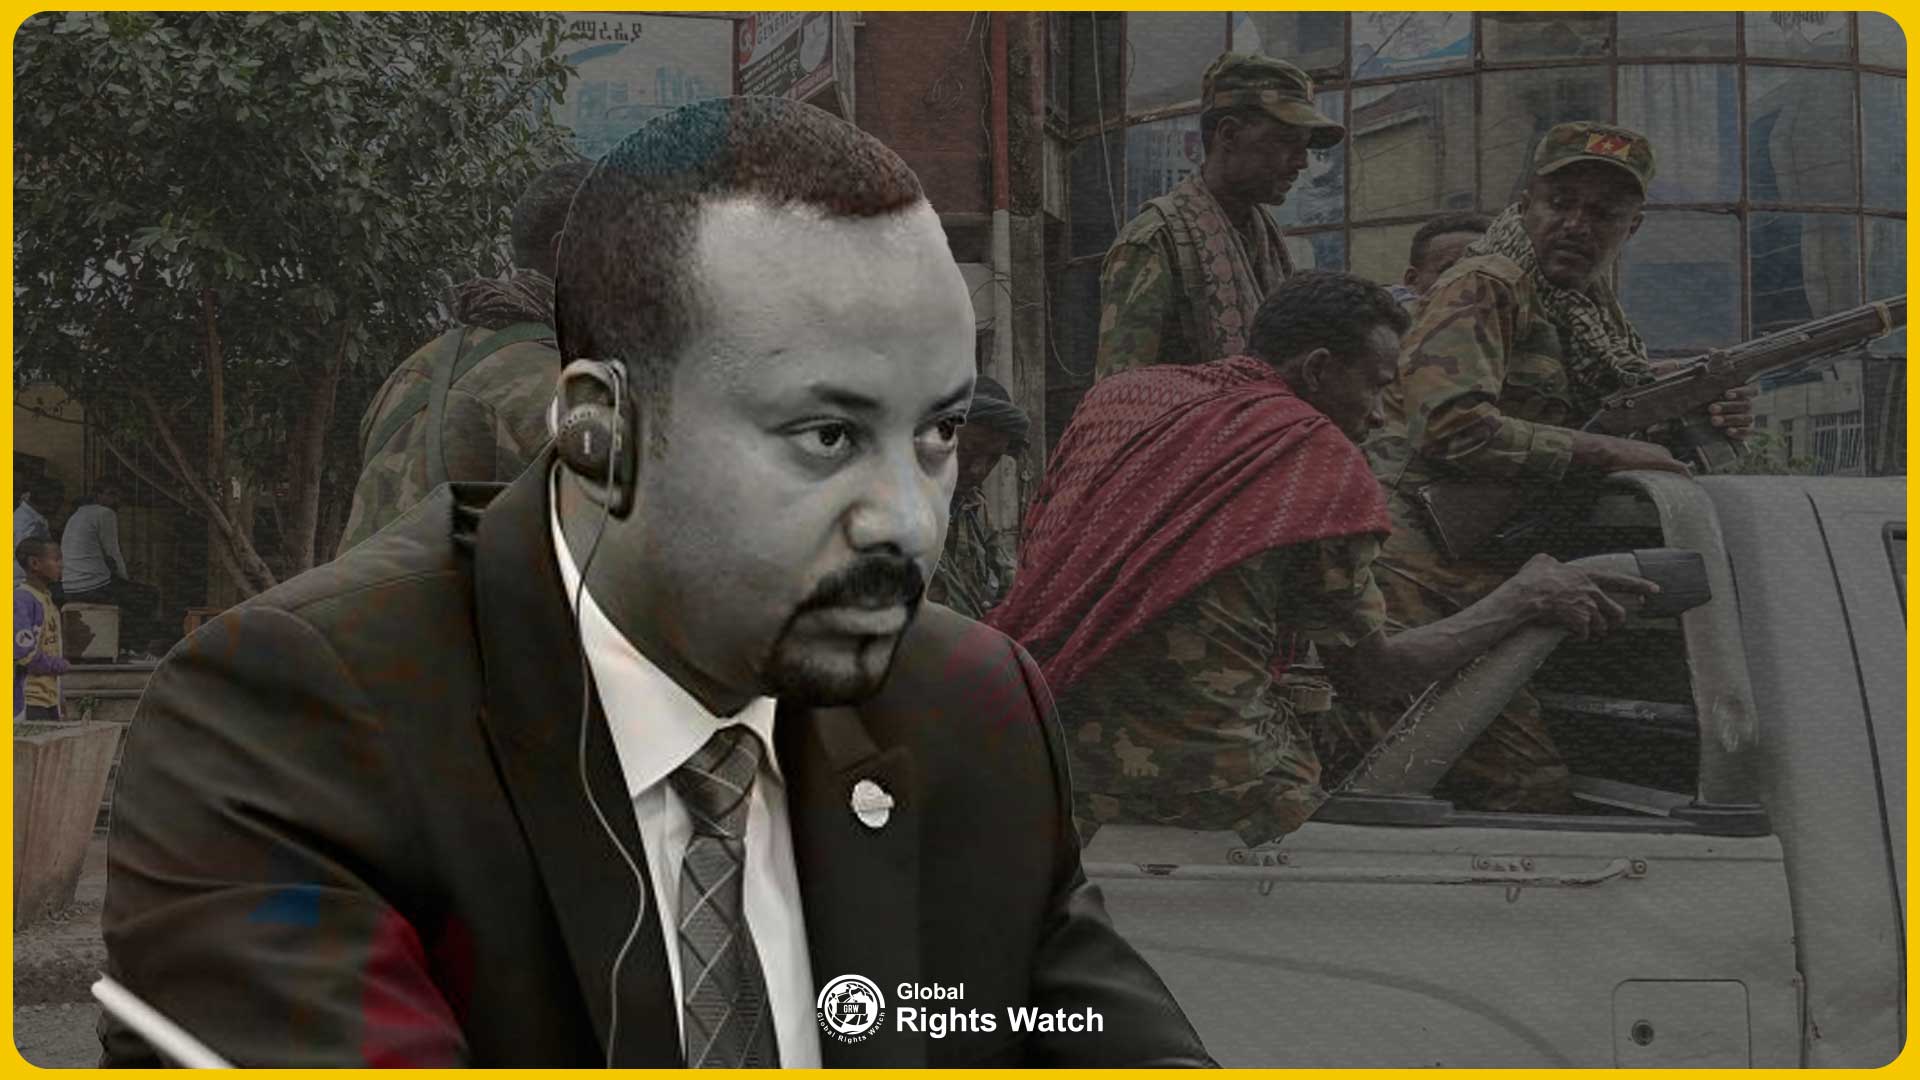 Ethiopia commits massacres and displaces hundreds of thousands in Tigray region